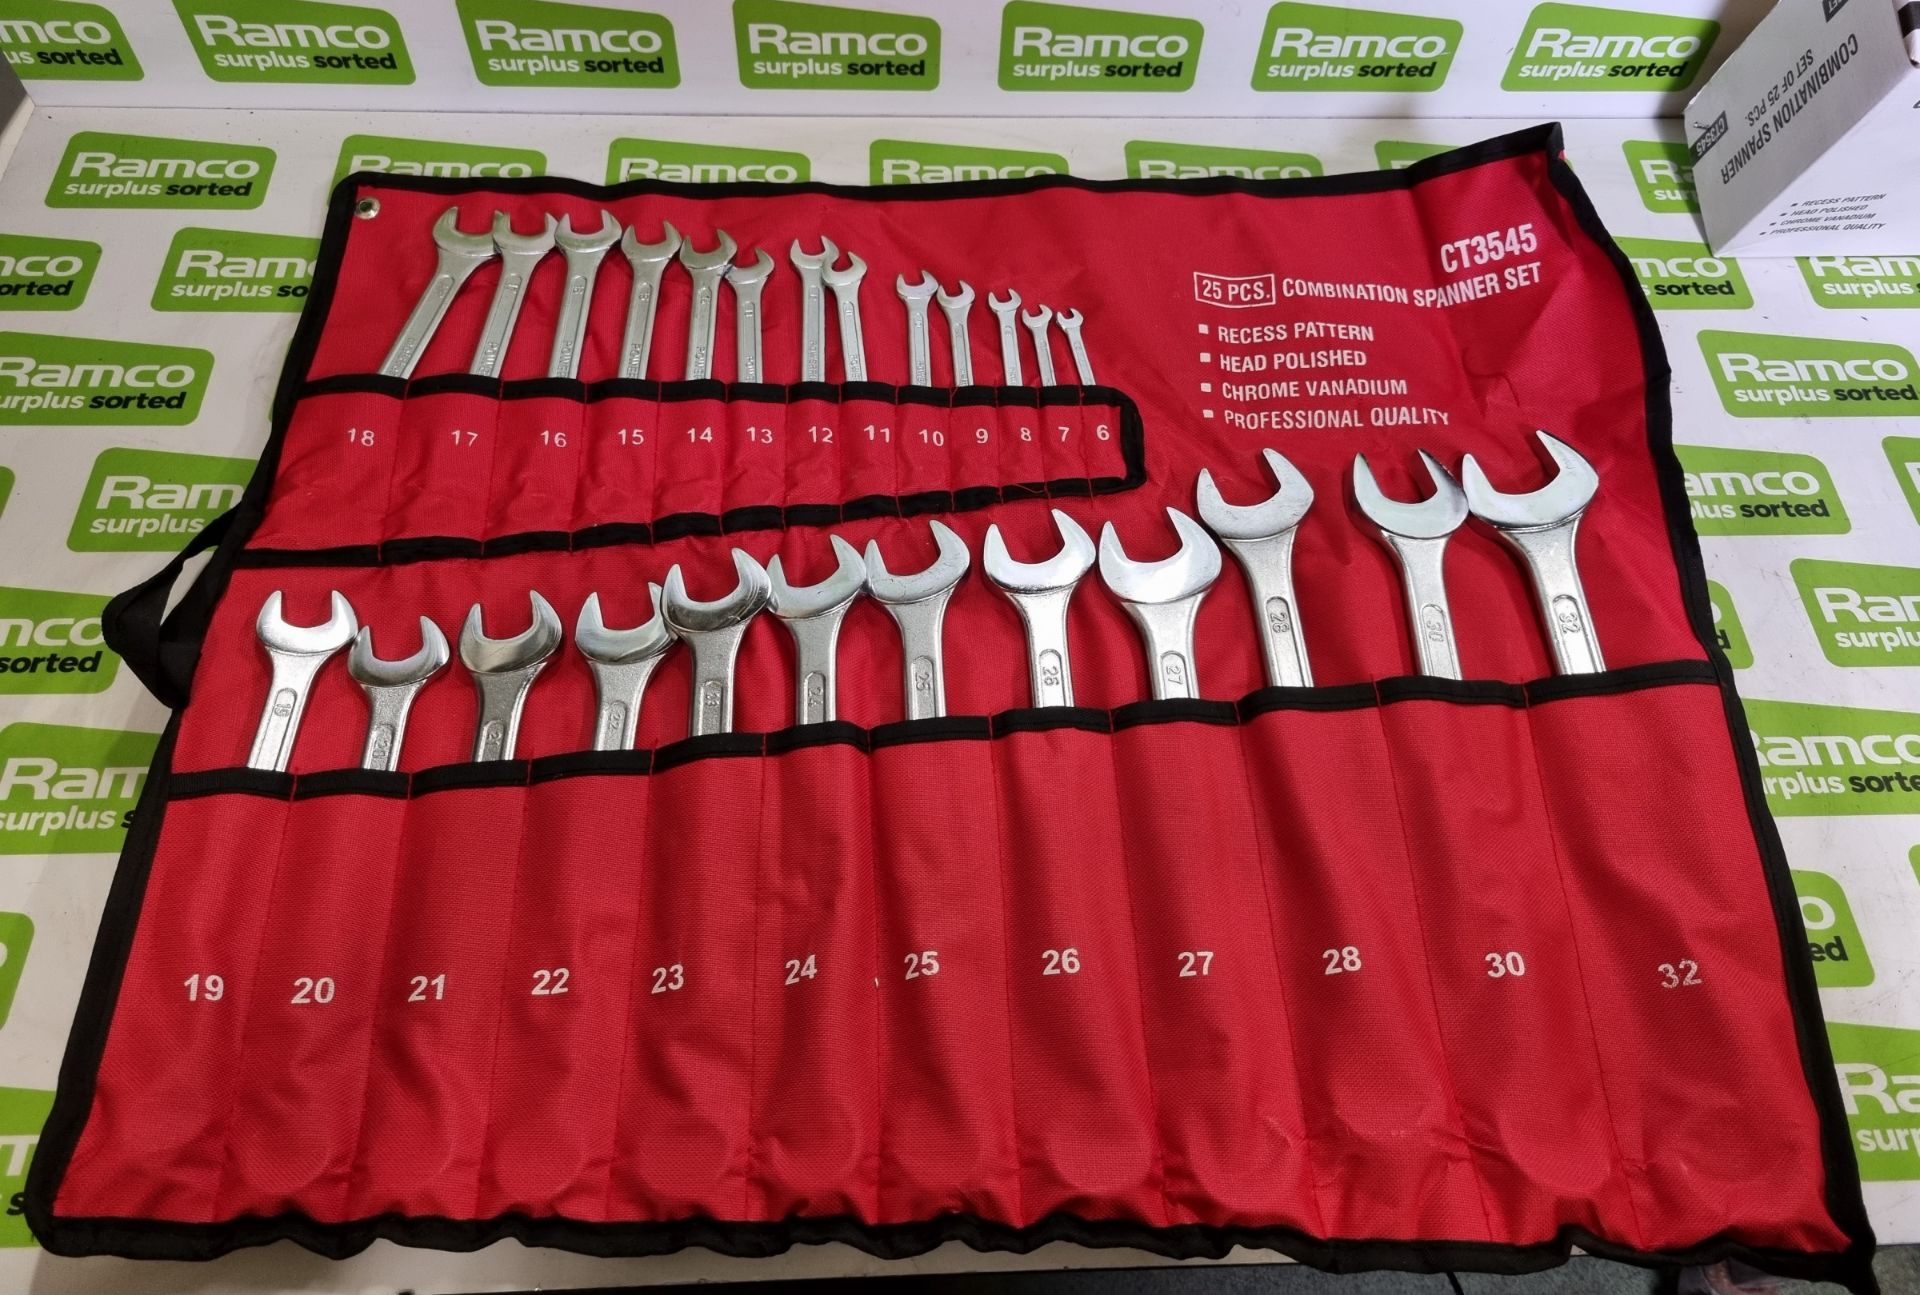 25pc combination spanner set - sizes 19-32mm - Image 3 of 3